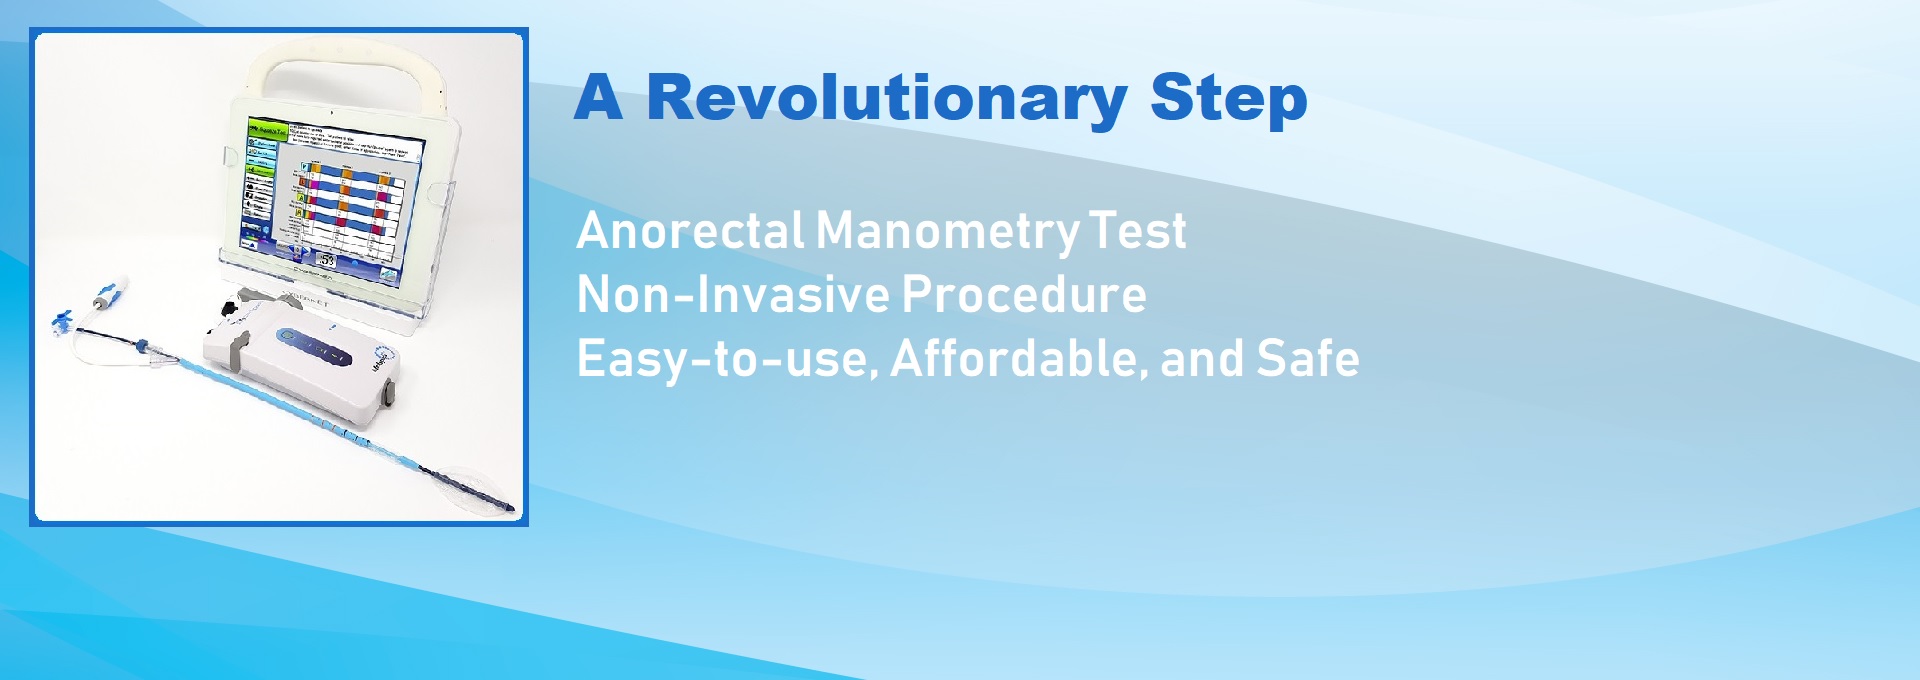 Anorectal Manometry Test at Gastroenterology Nutrition Specialists